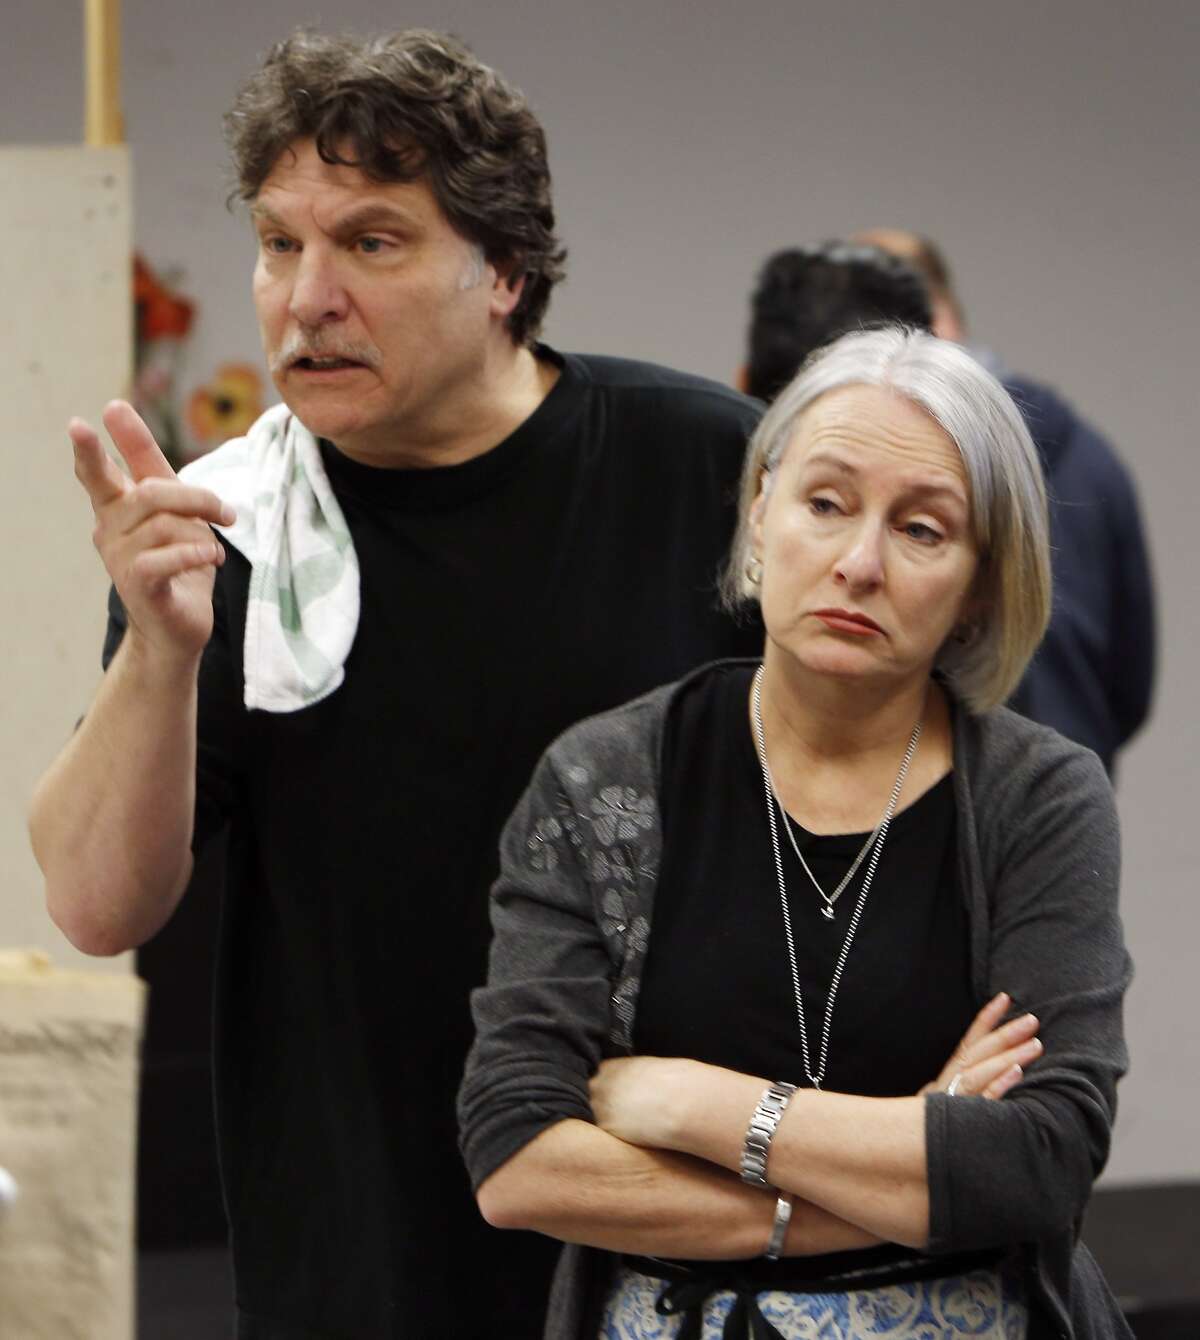 Seana McKenna, right, as Amalia, and Marco Barricelli, as Gennaro, in rehearsal of American Conservatory Theater's Italian comedy "Napoli."